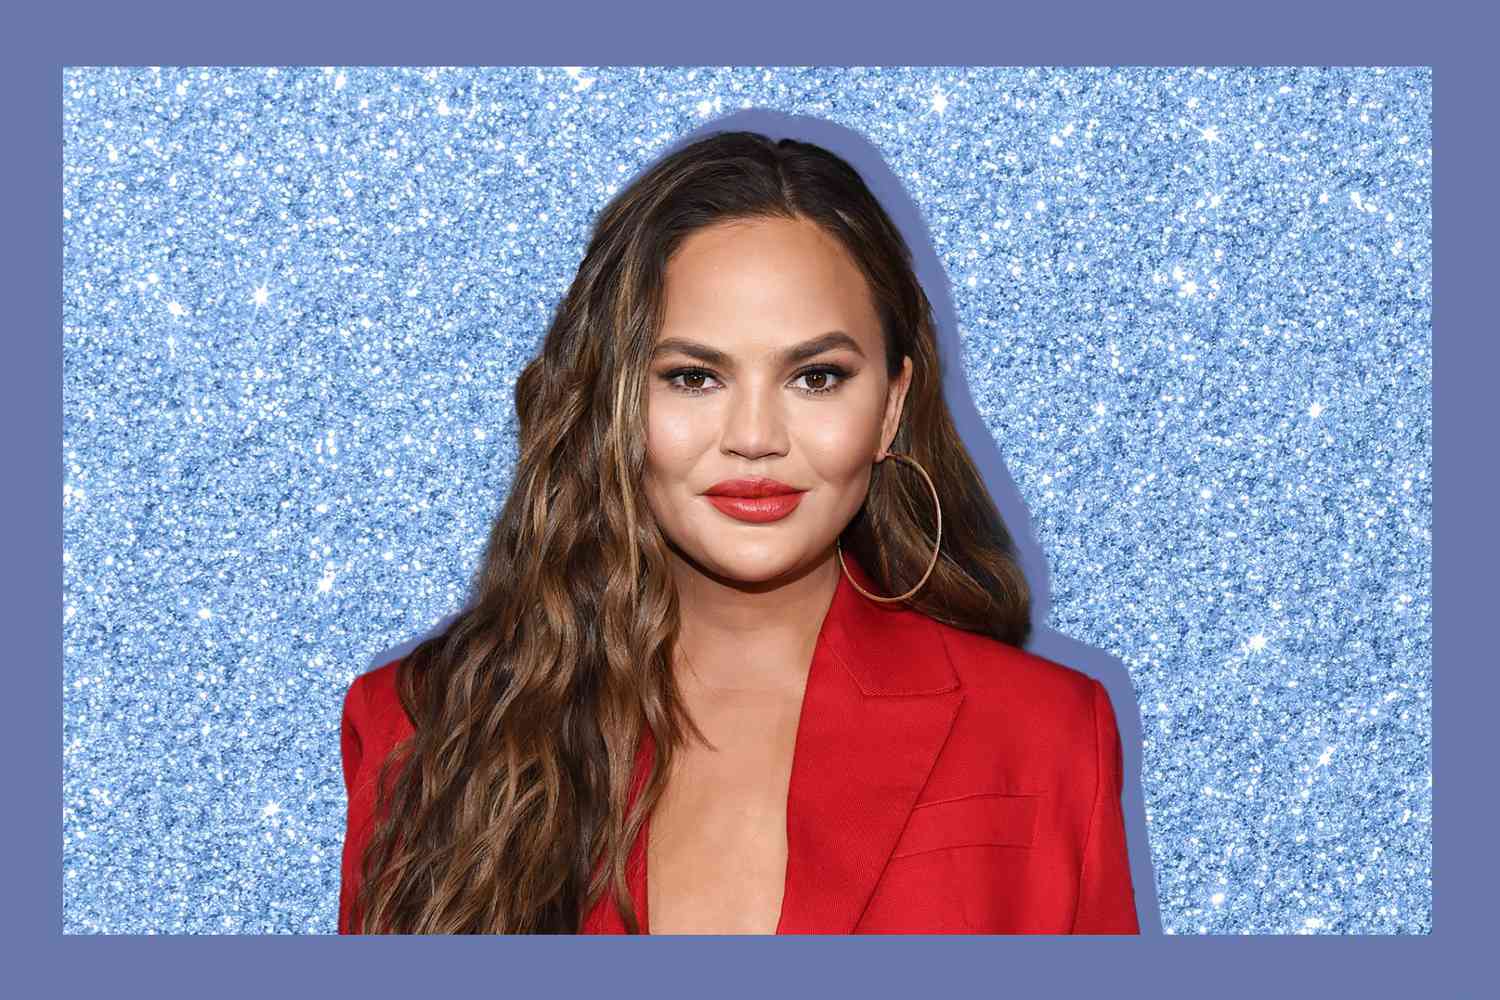 LOS ANGELES, CALIFORNIA - JUNE 26: Chrissy Teigen arrives at the premiere of NBC's "Bring The Funny" at Rockwell Table & Stage on June 26, 2019 in Los Angeles, California. (Photo by Amanda Edwards/WireImage)